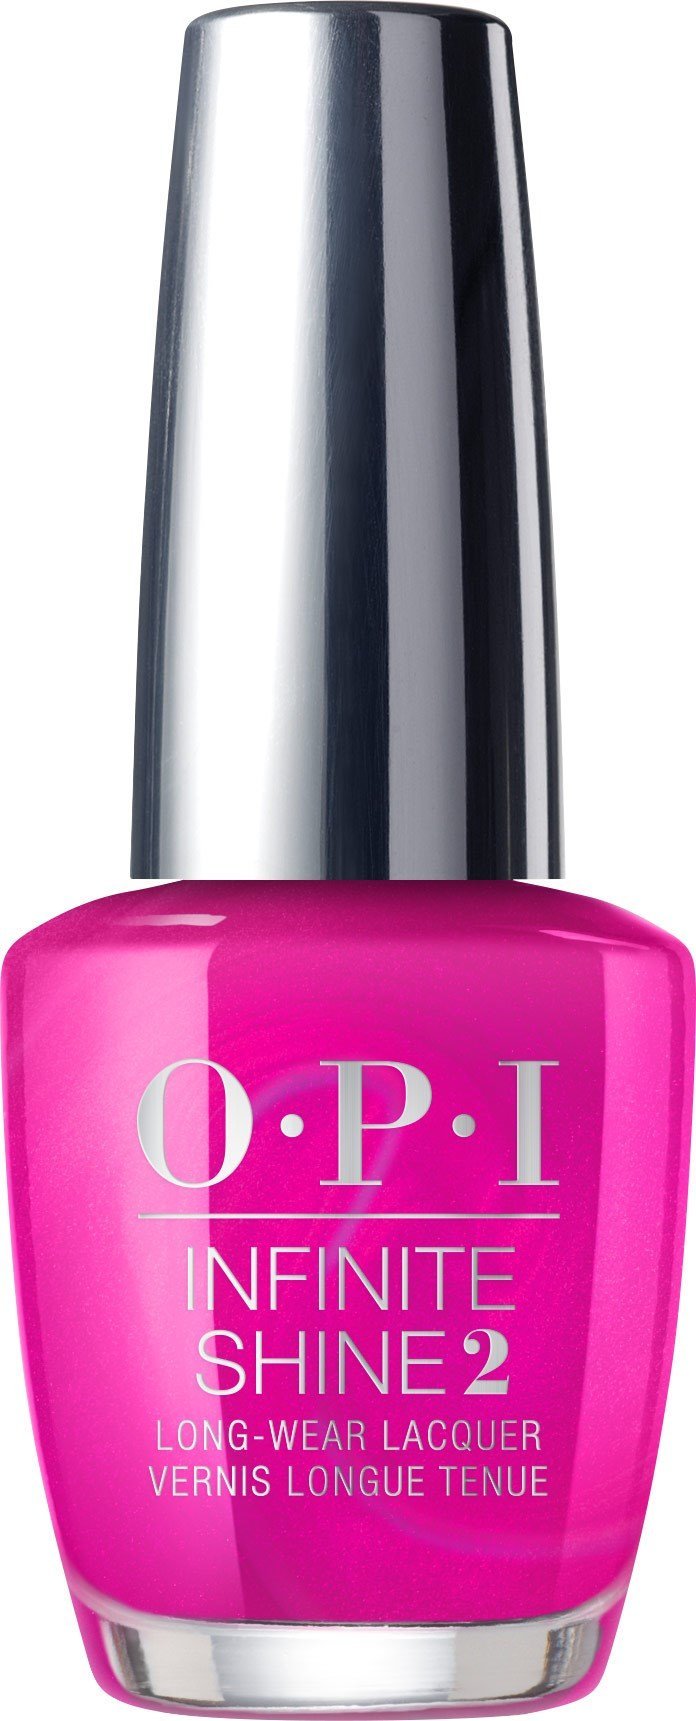 OPI Infinite Shine - All Your Dreams in Vending Machines